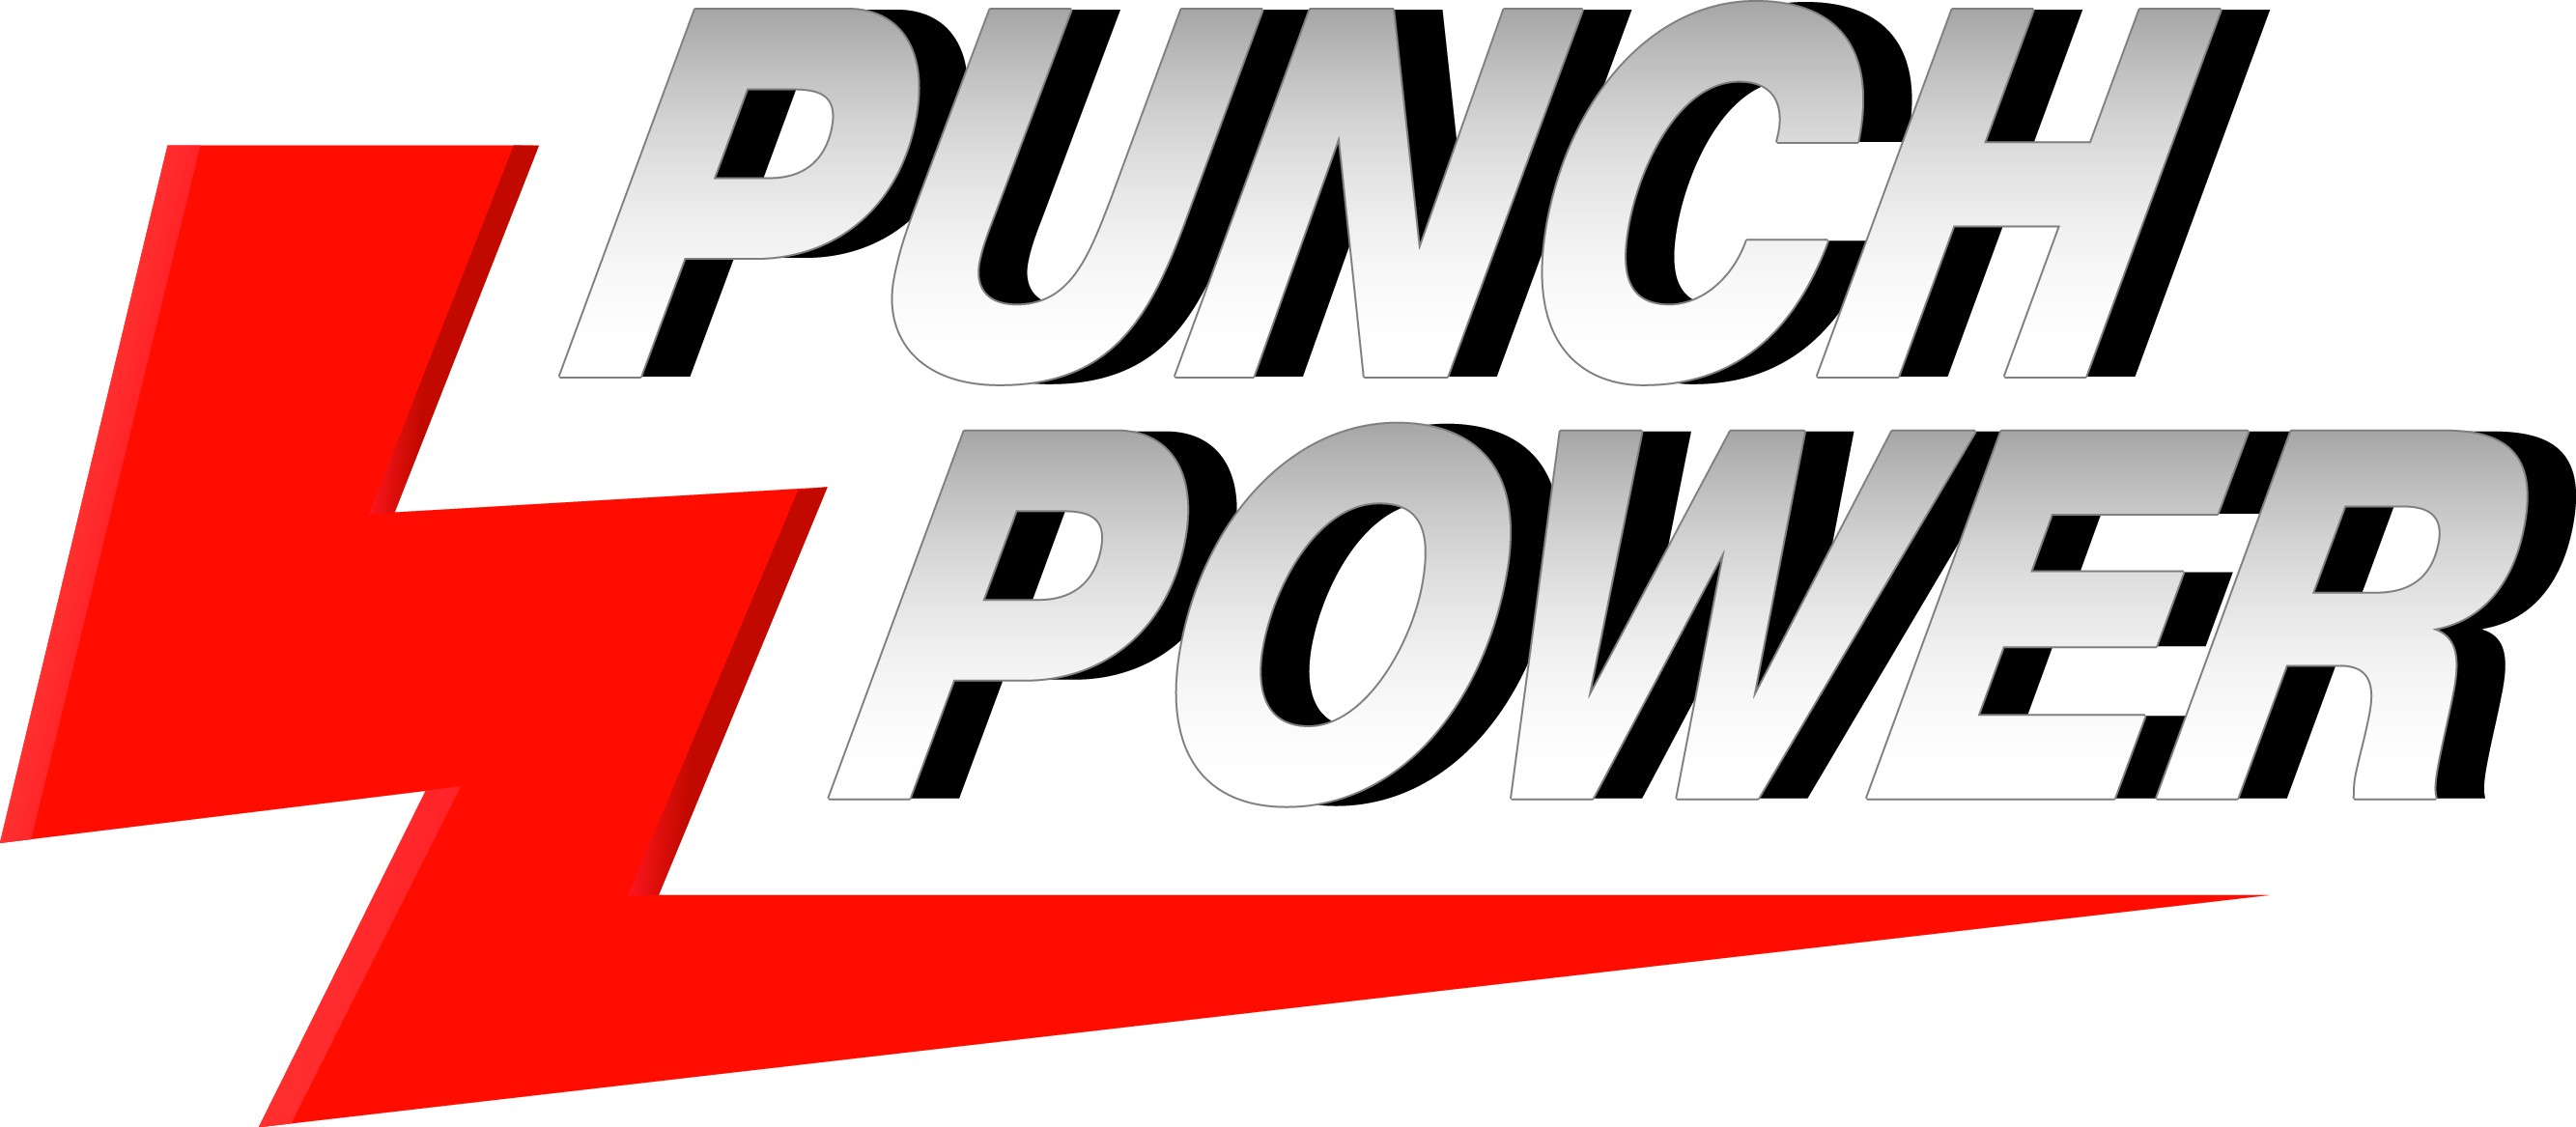 Punch Power